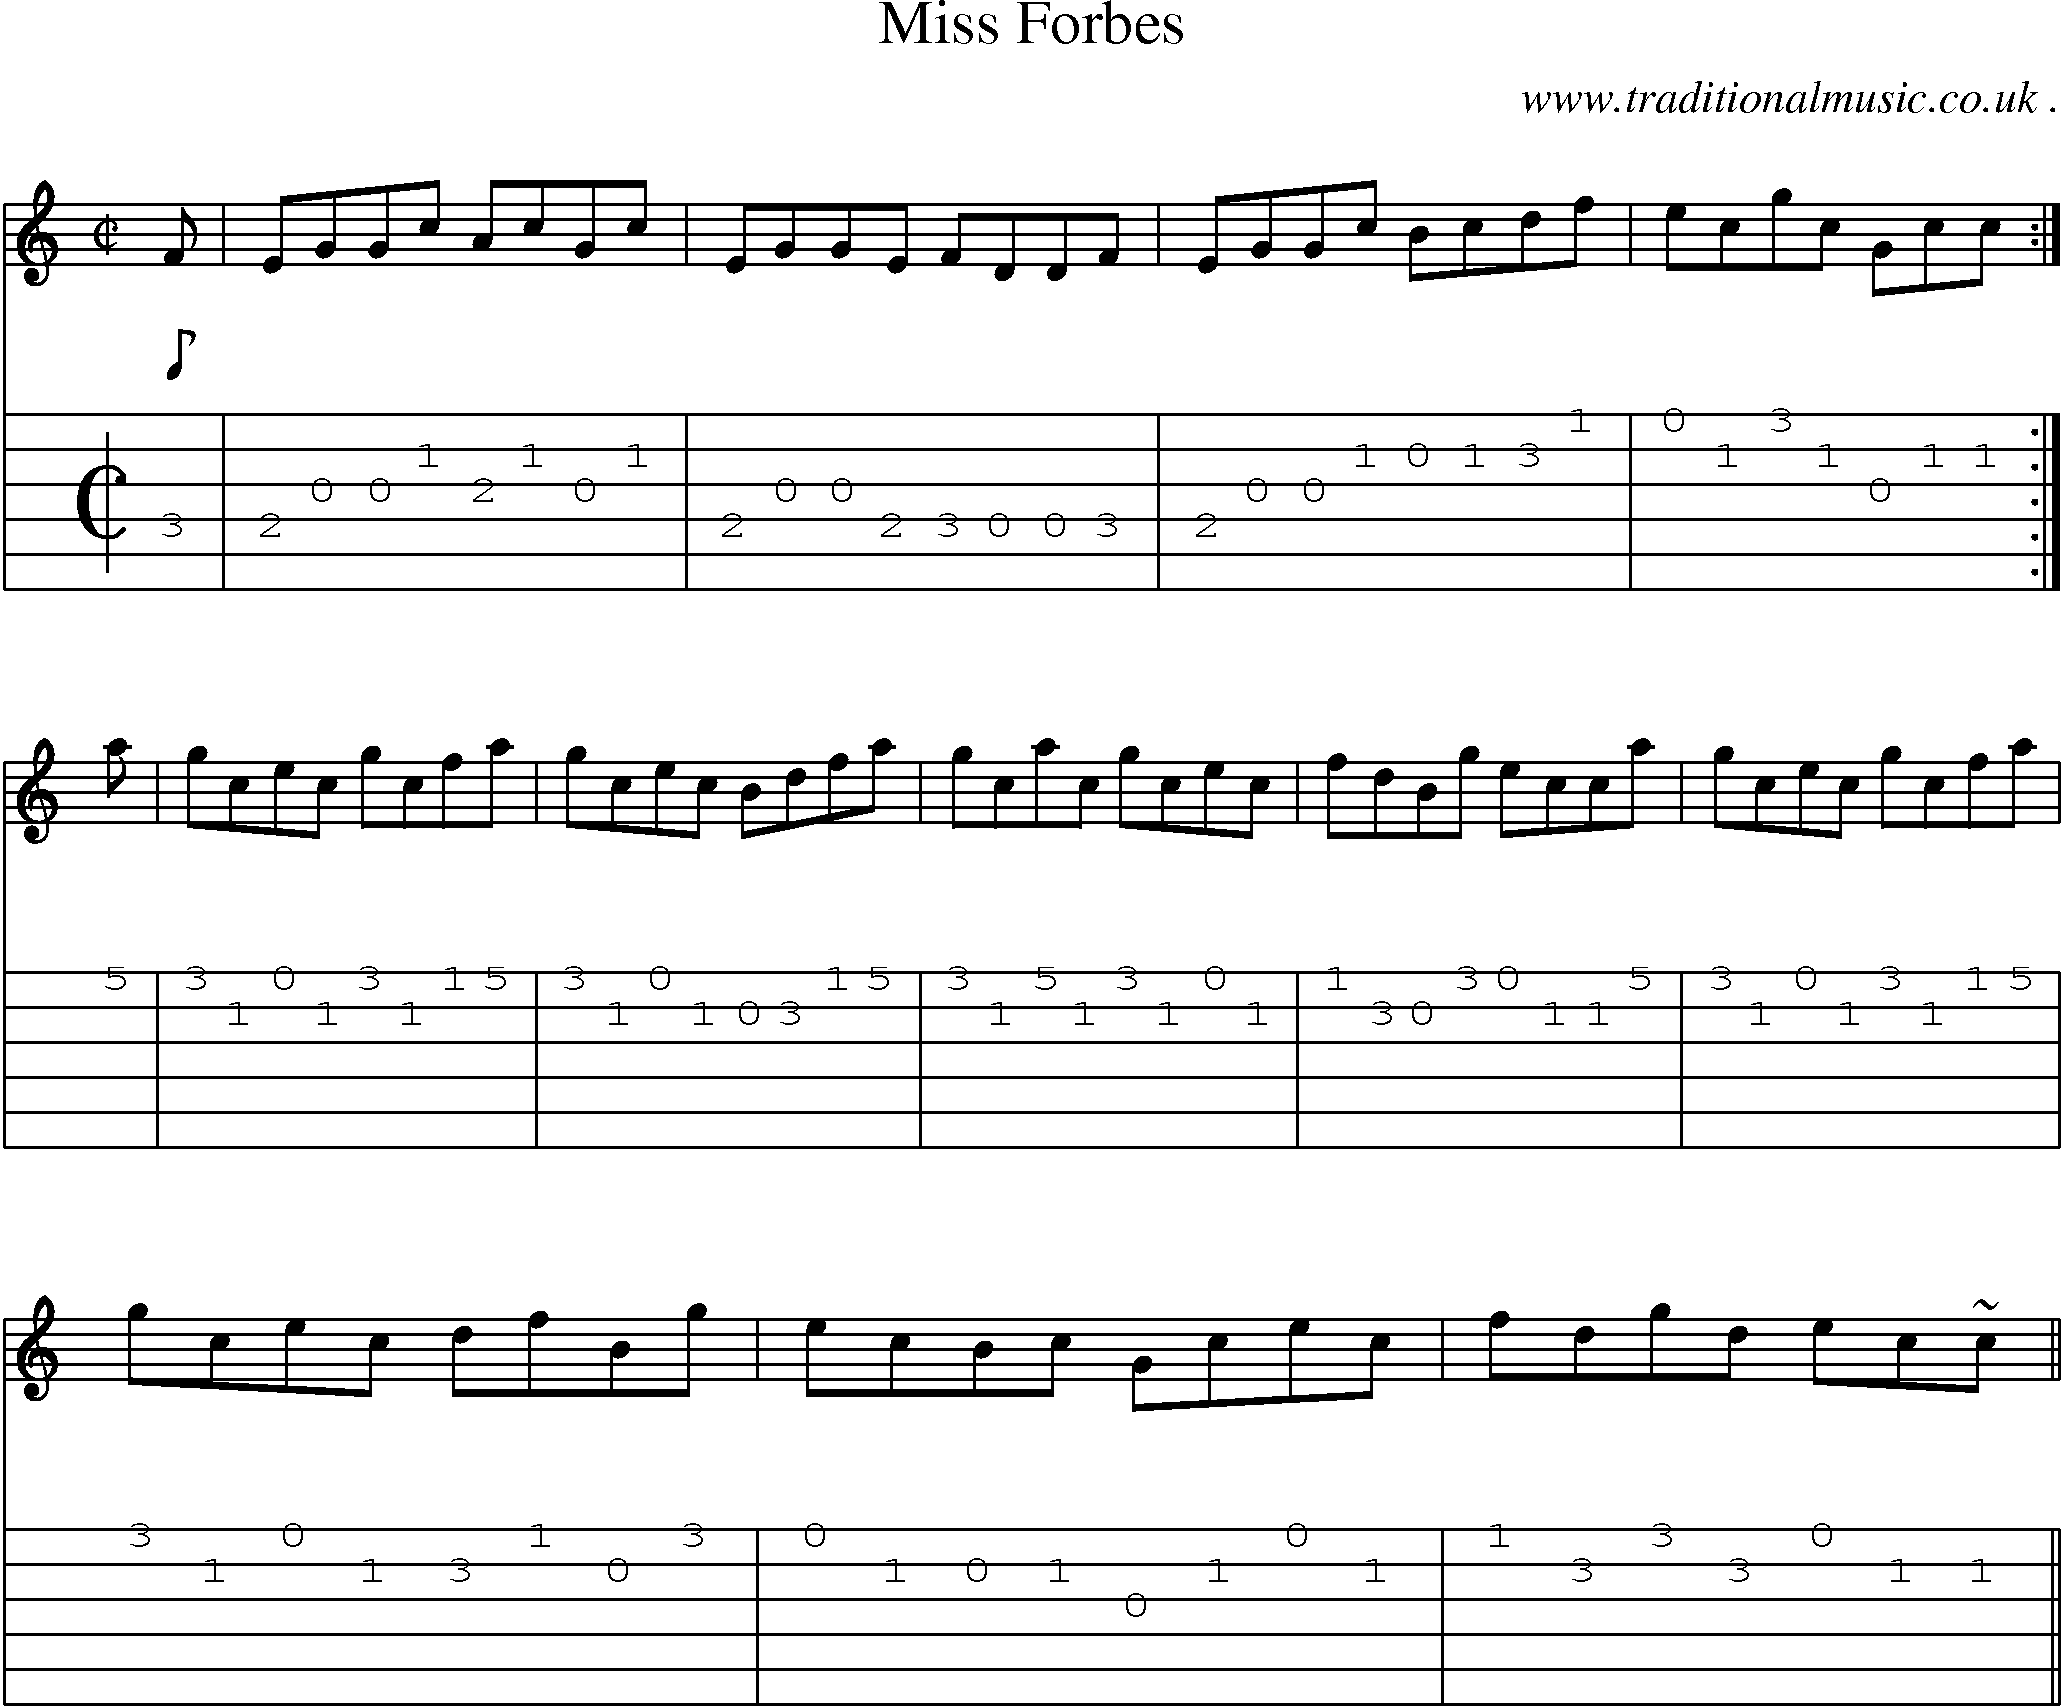 Sheet-music  score, Chords and Guitar Tabs for Miss Forbes 